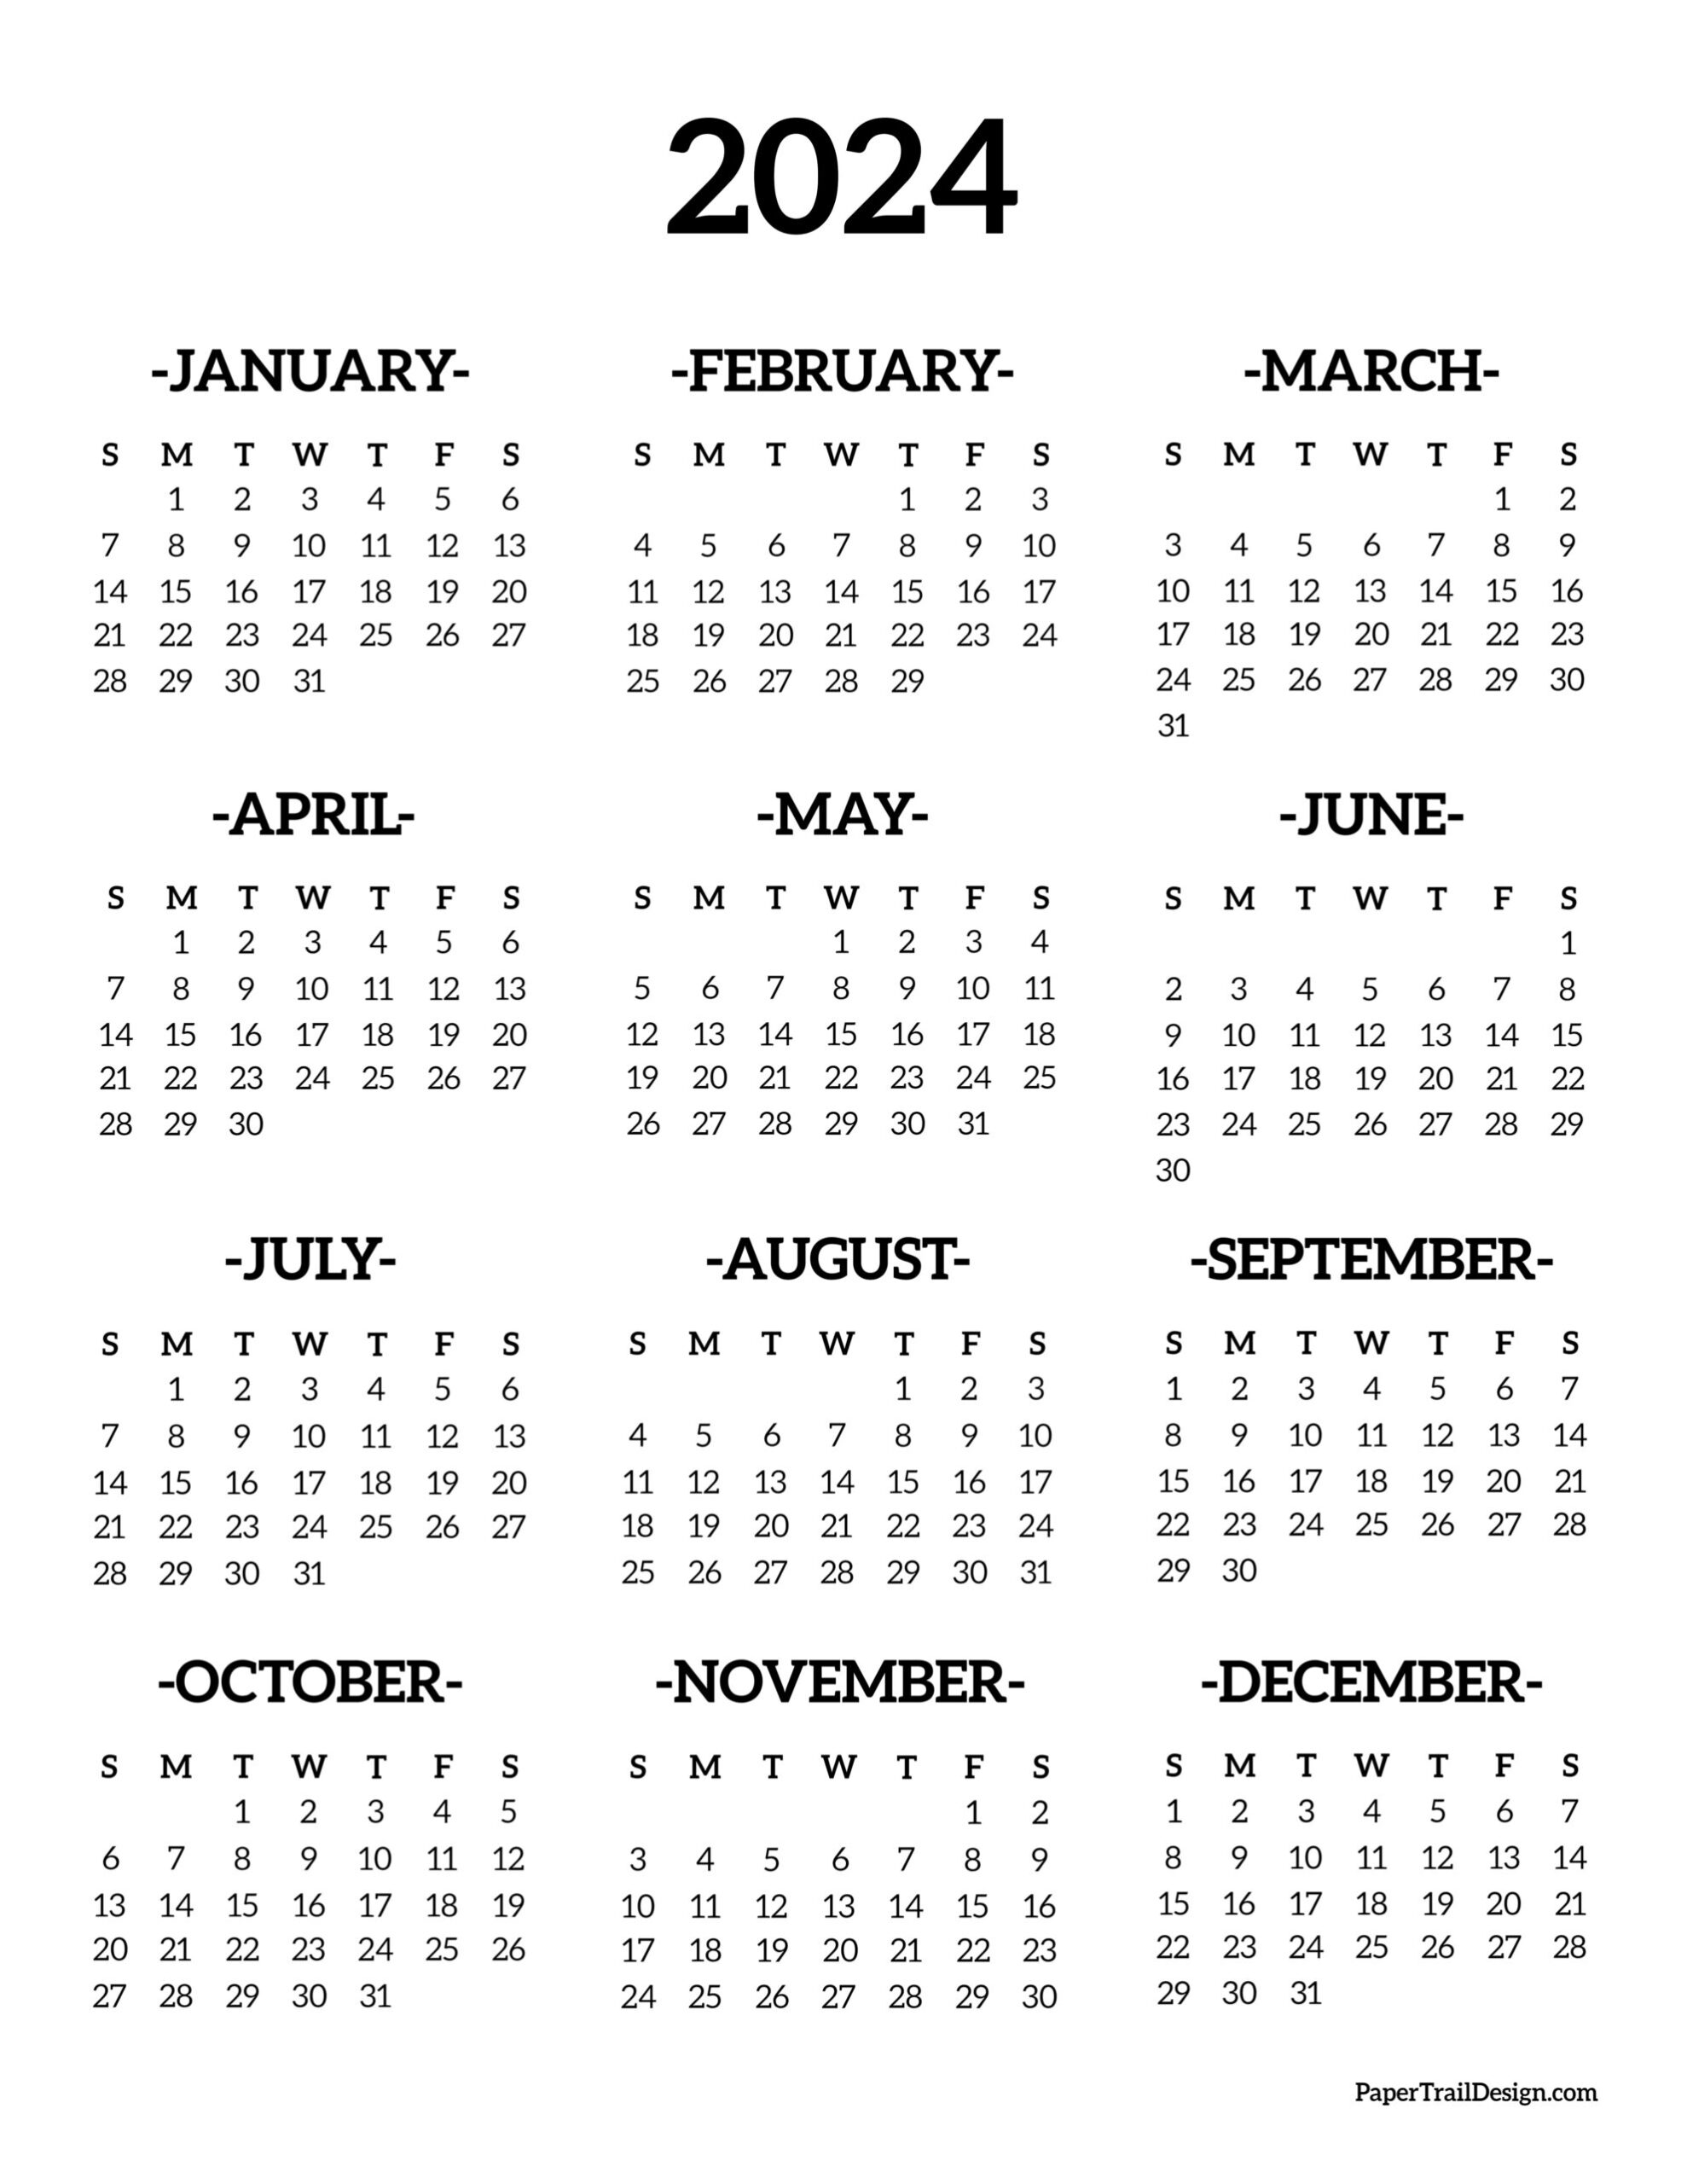 Calendar 2024 Printable One Page - Paper Trail Design for 2024 Year At A Glance Free Printable Calendar